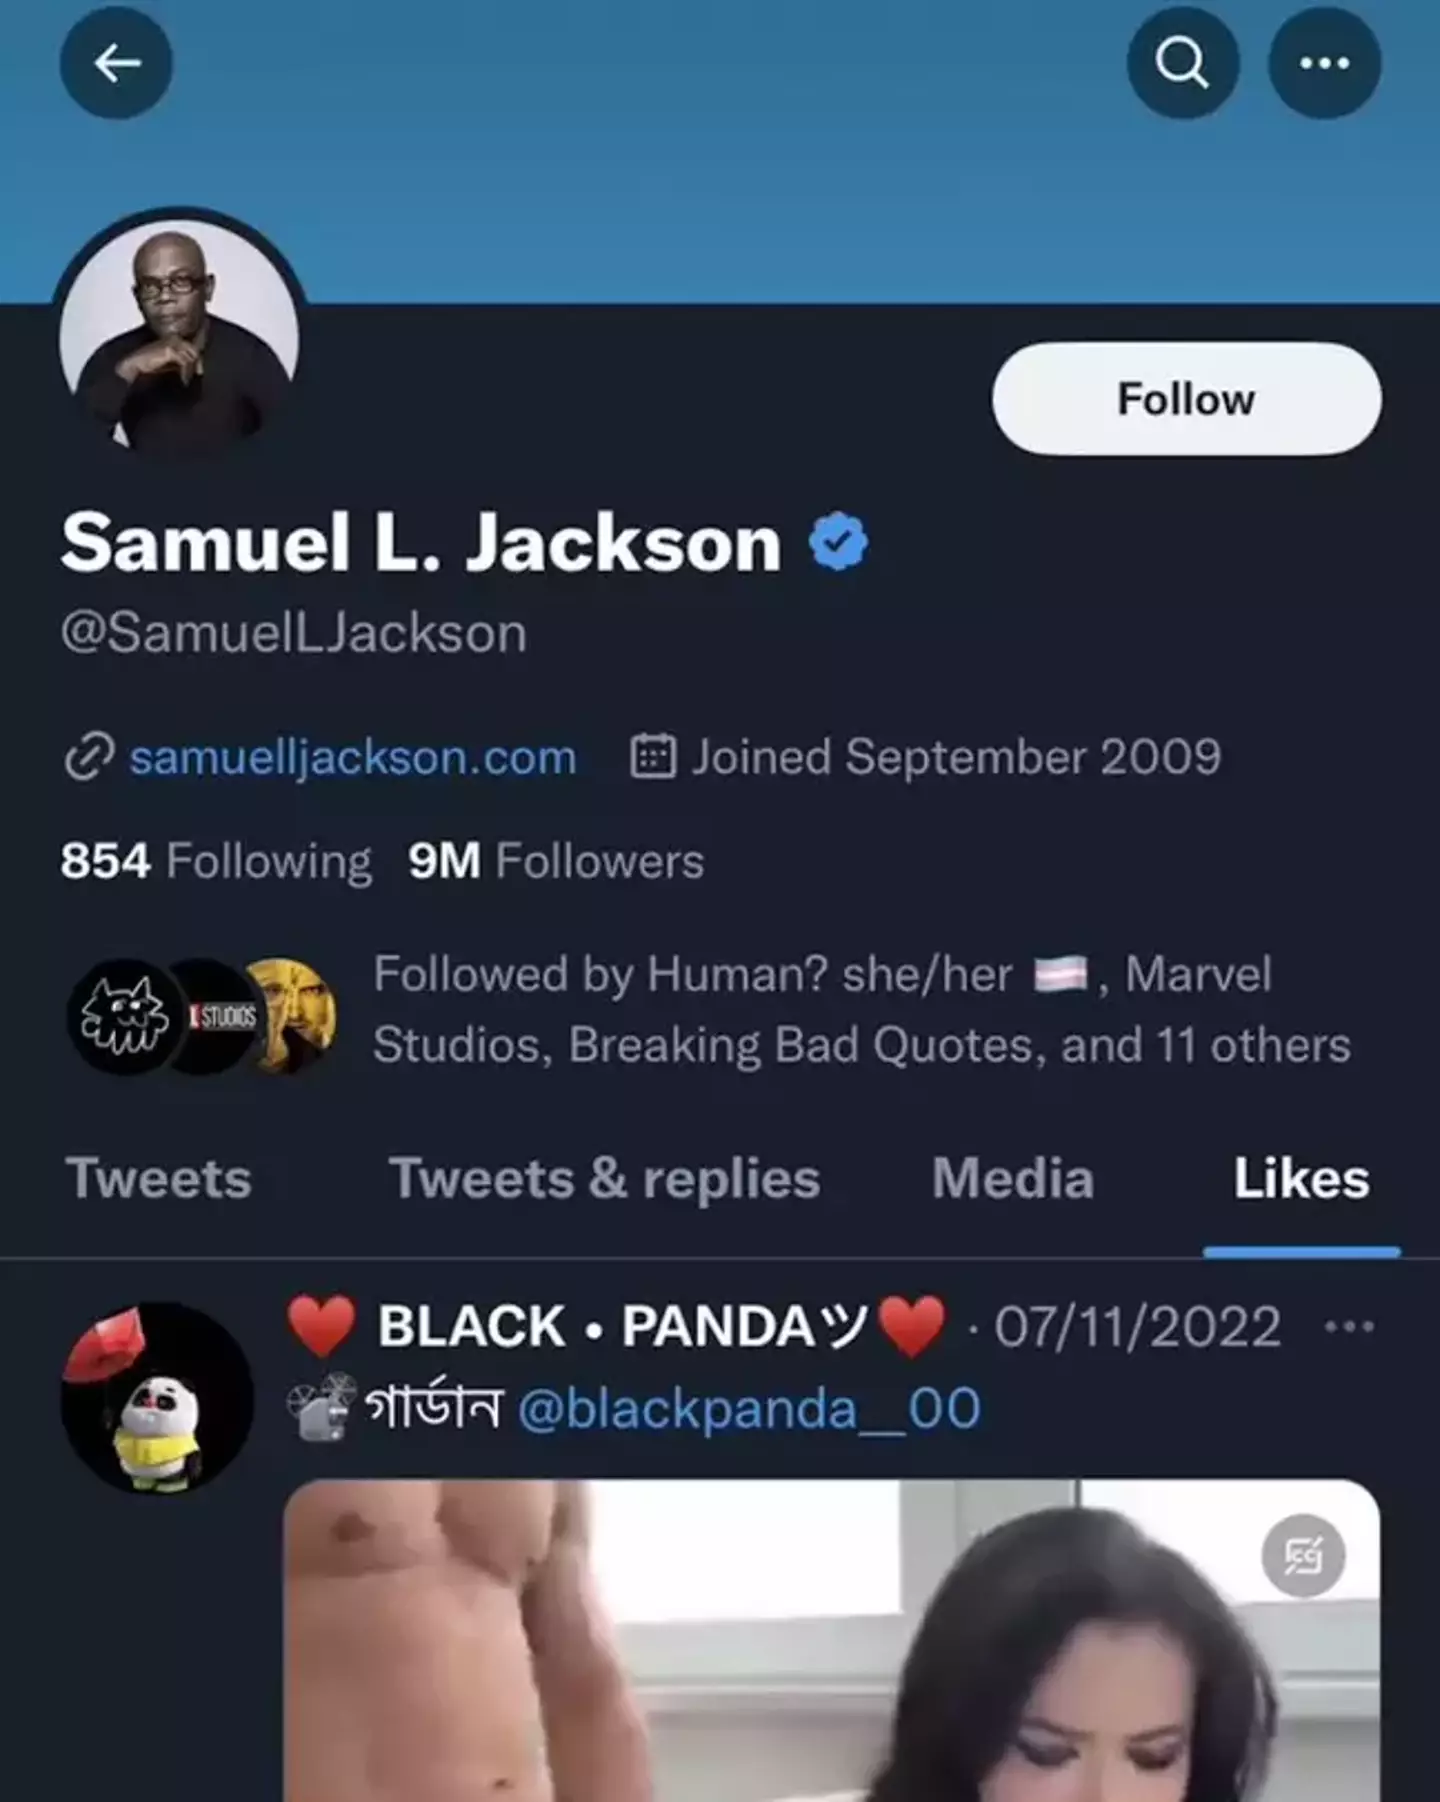 Samuel L. Jackson's account was recently caught liking x-rated content.